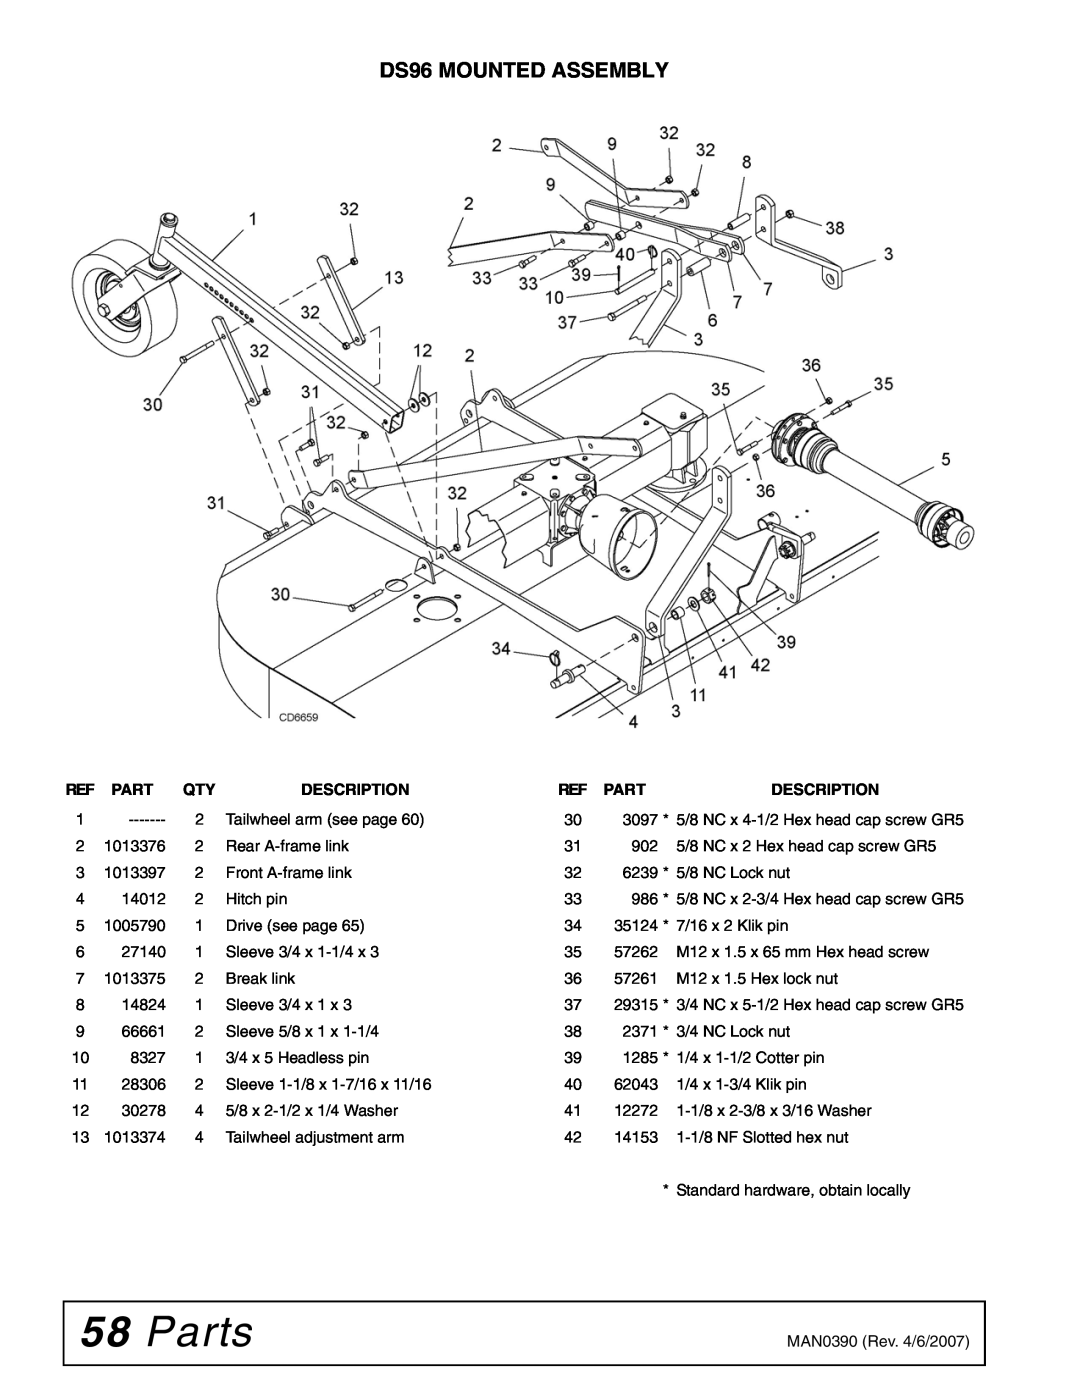 Woods Equipment DS120 manual Parts, DS96 MOUNTED ASSEMBLY, Description 